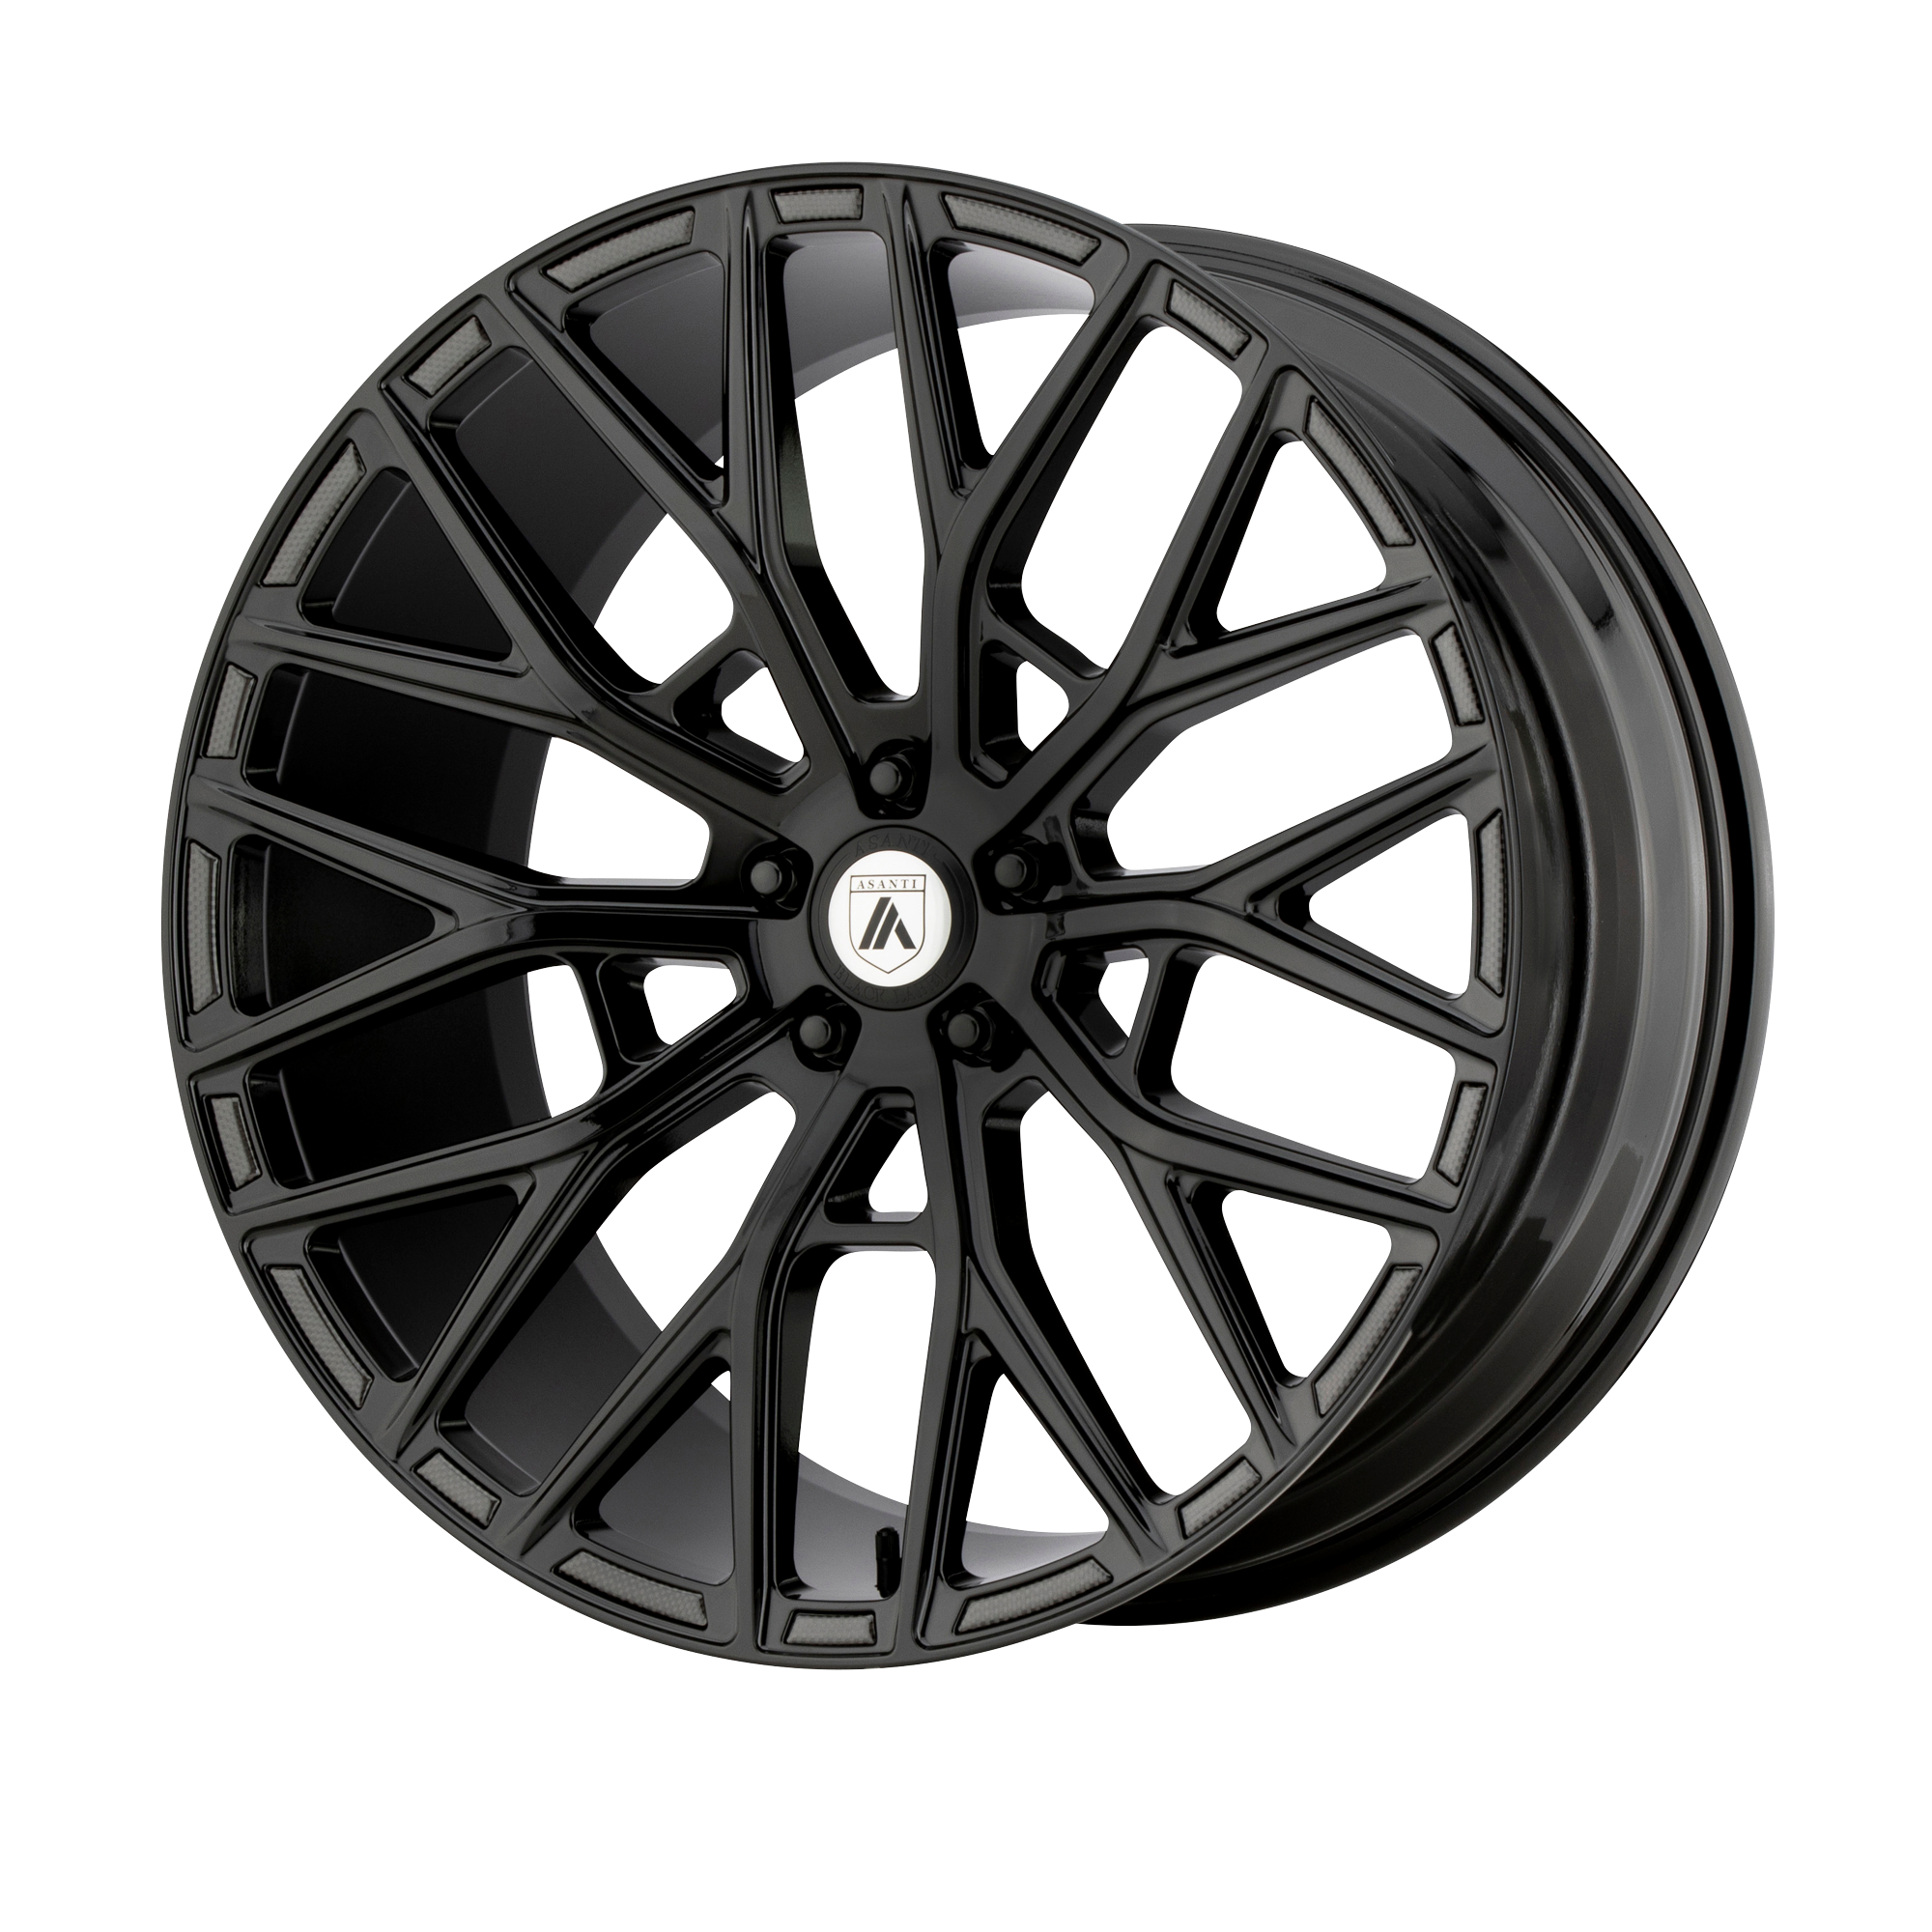 LEO 20x8.5 5x120.00 GLOSS BLACK (38 mm) - Tires and Engine Performance